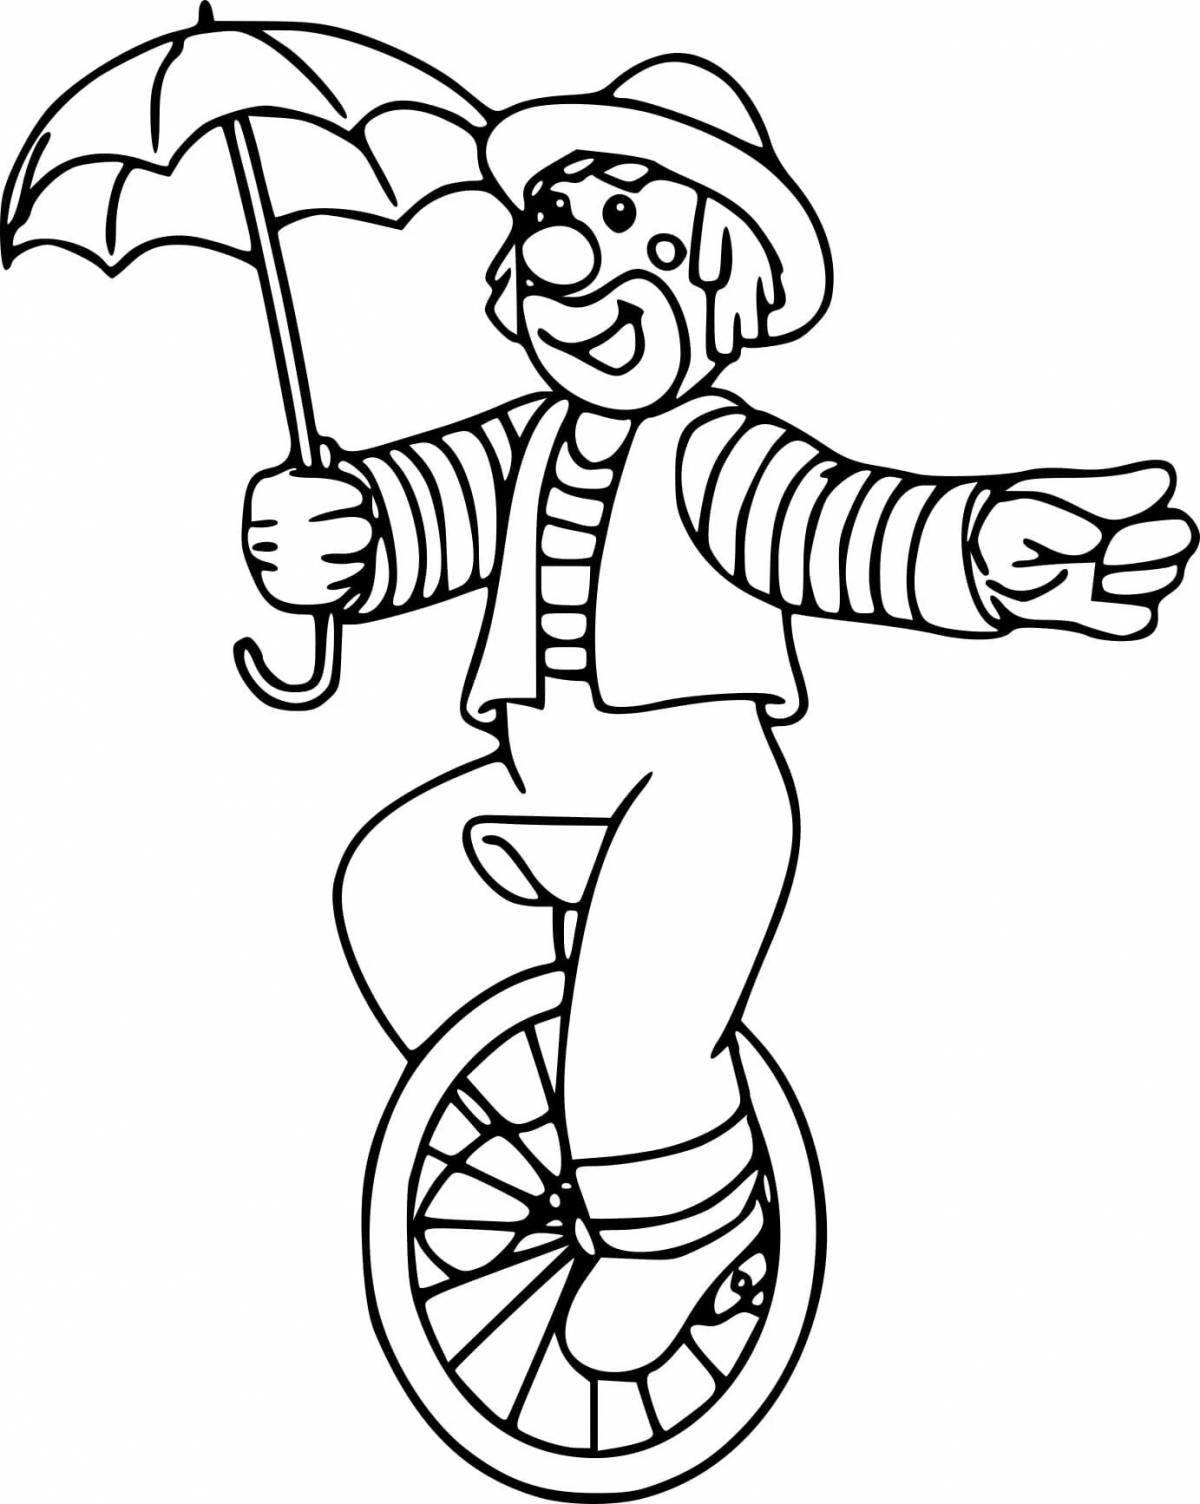 Coloring page mesmerizing circus performer